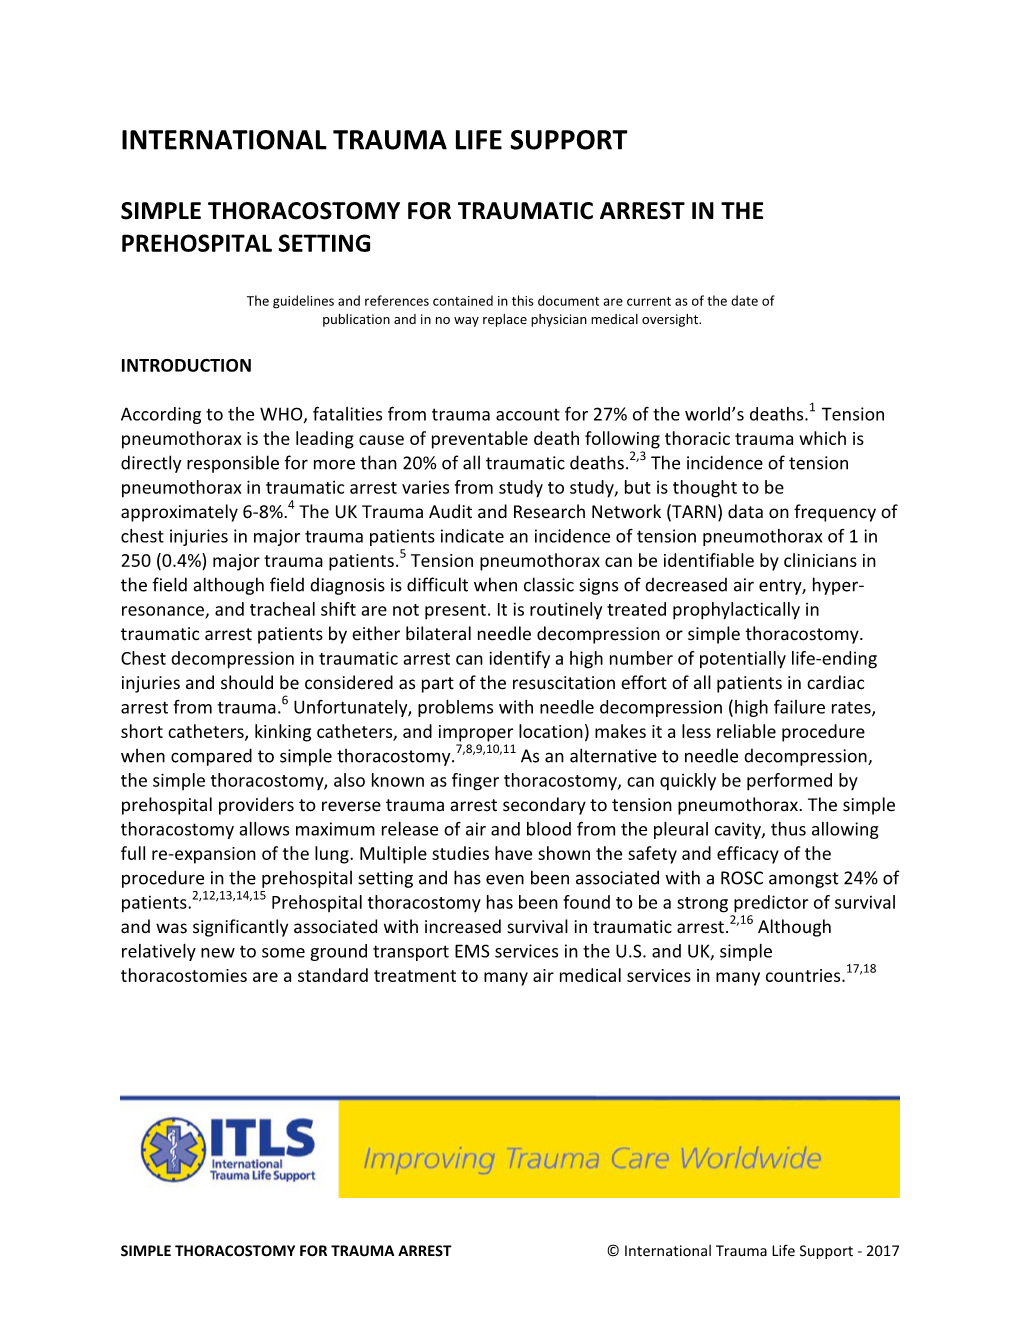 Simple Thoracostomy for Traumatic Arrest in the Prehospital Setting